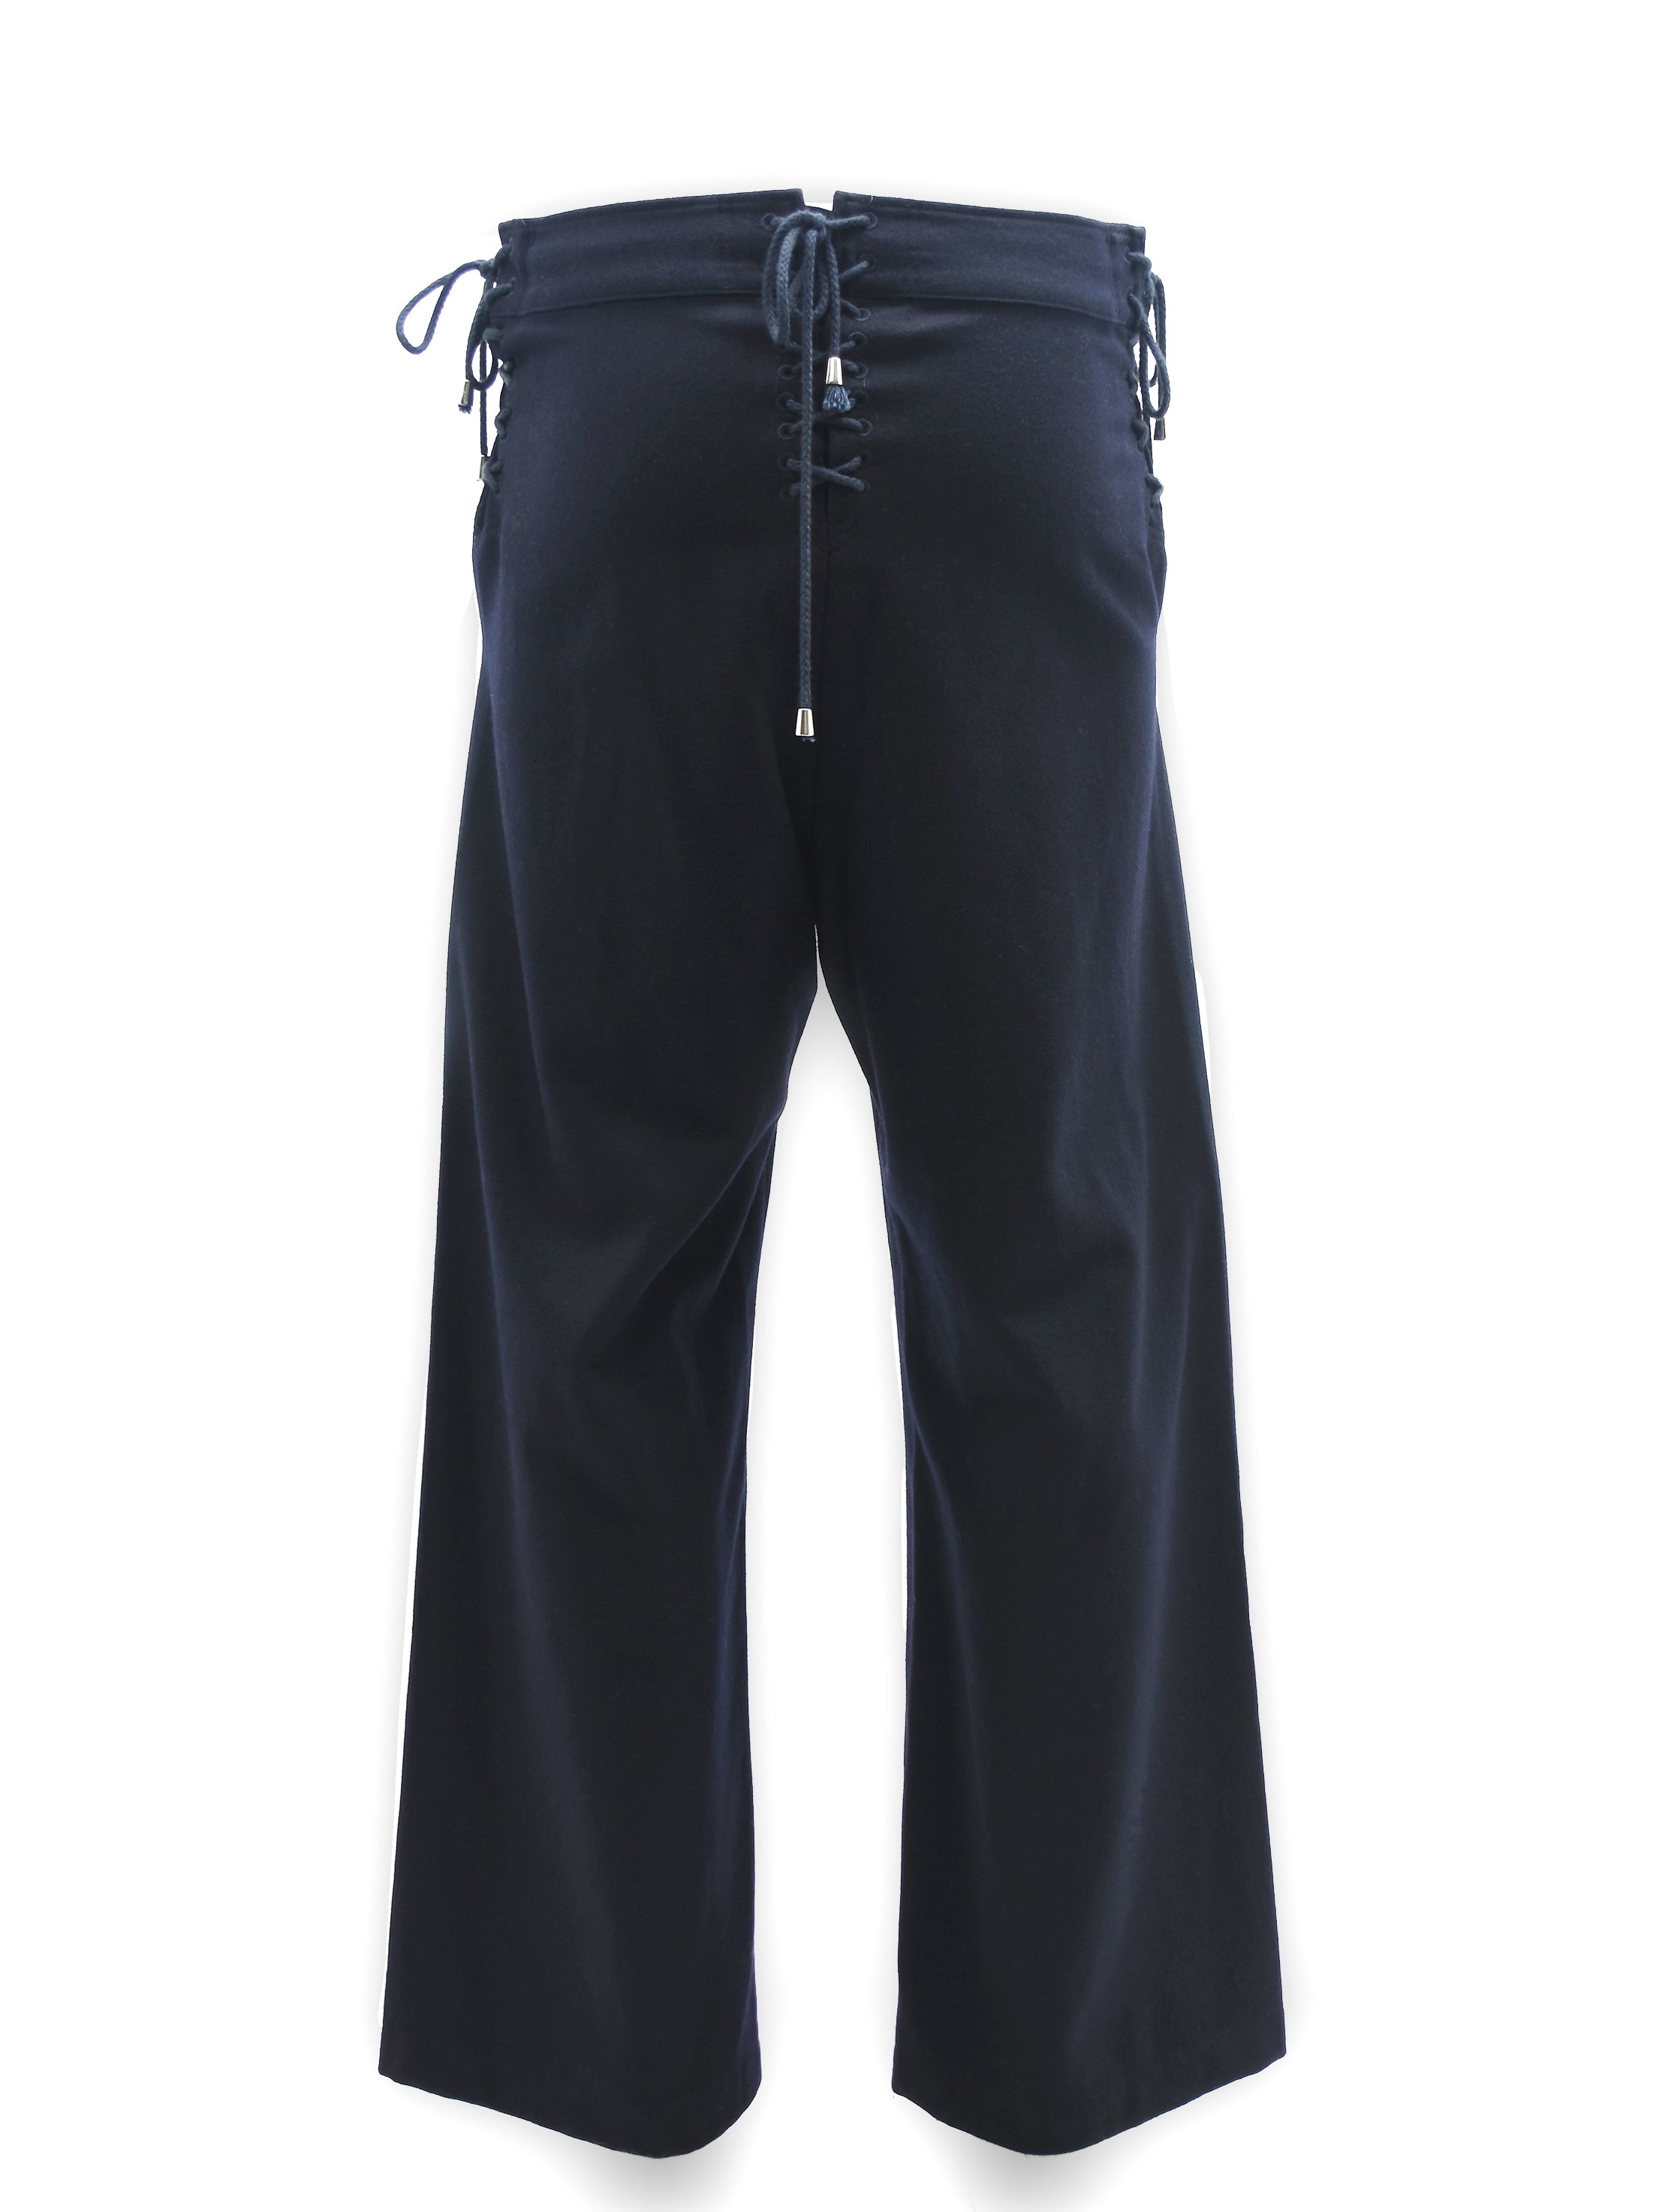 WOOL TROUSERS WITH SHOE LACE DETAILING IN NAVY